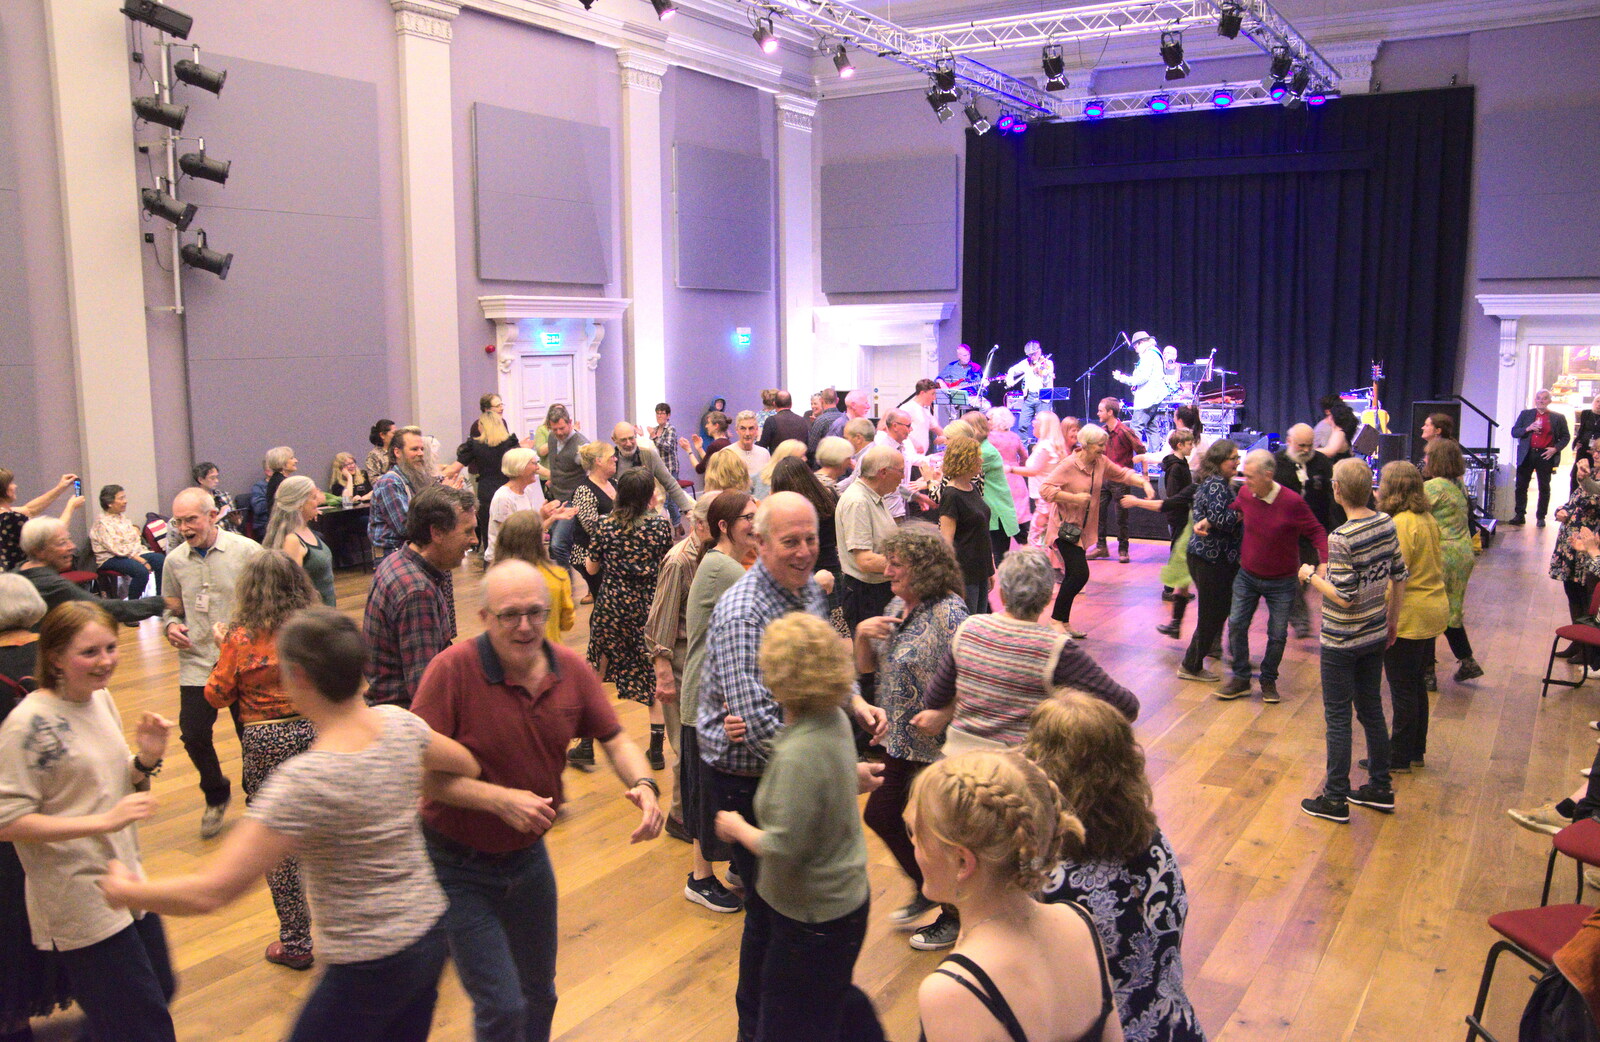 The scene in the Cornhall from DesignerMakers' Fund-Raising Ceilidh, The Cornhall, Diss - 13th May 2023